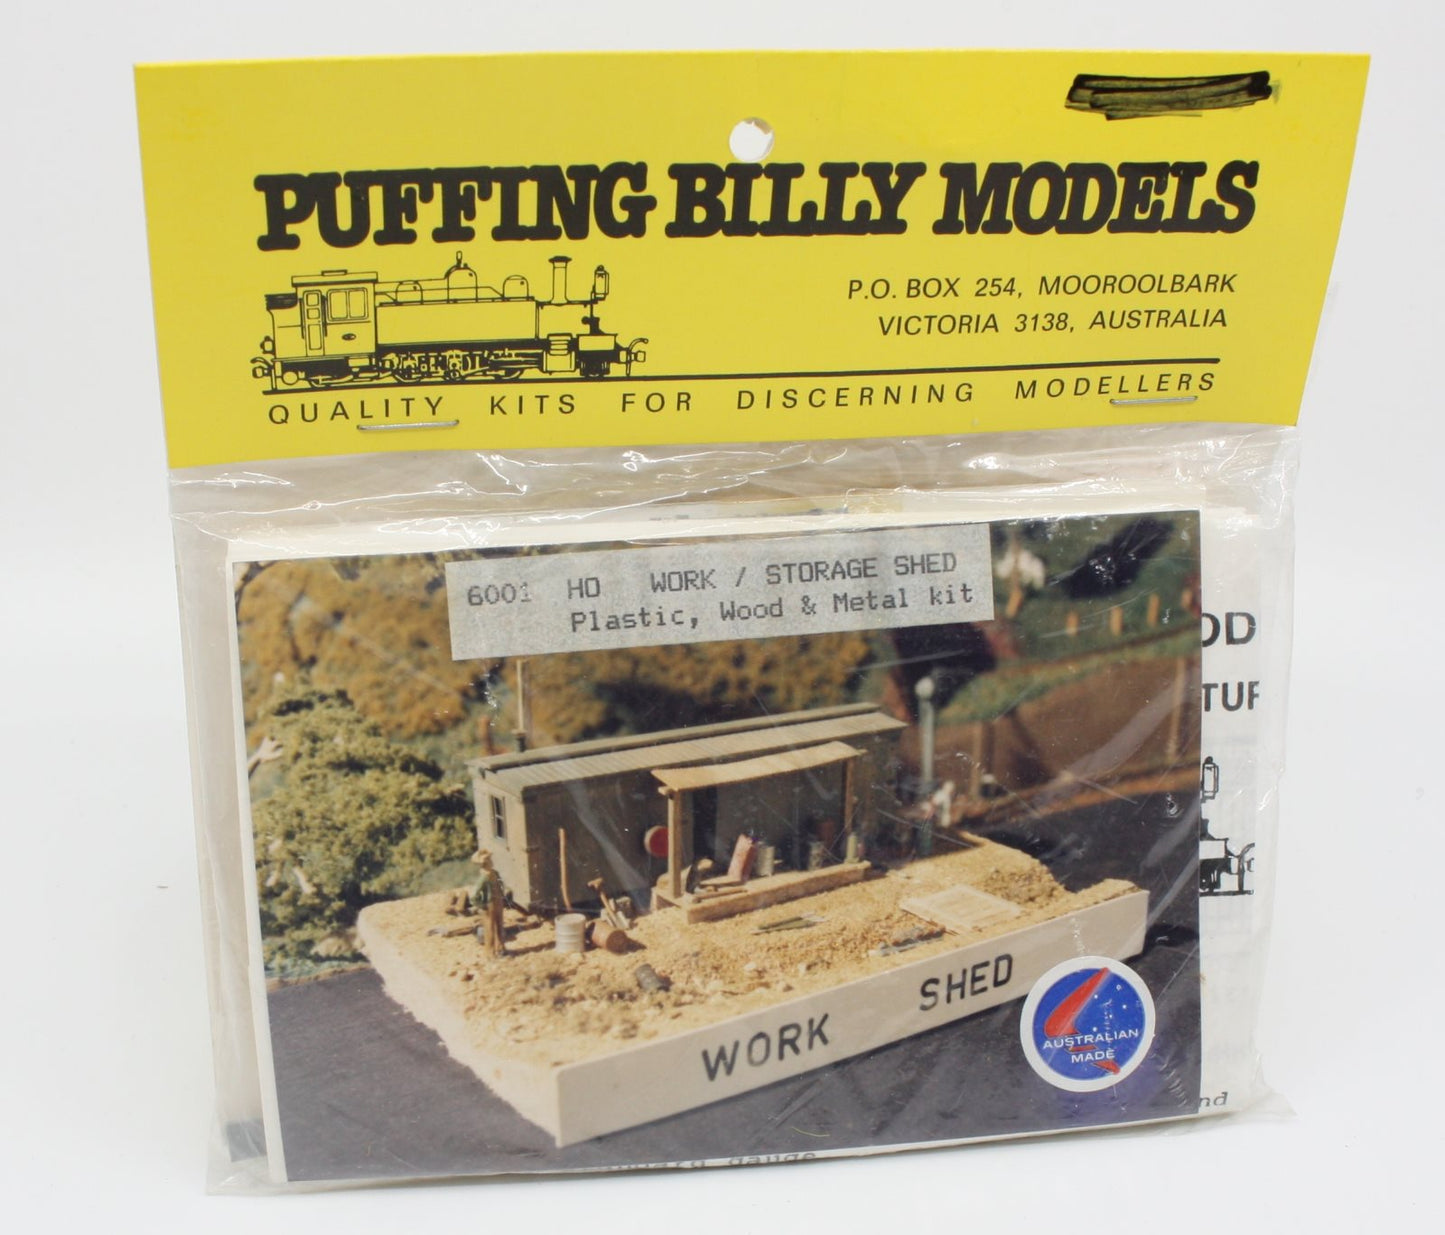 Puffing Billy Models 6001 HO Work / Storage Shed Plastic, Wood, and Metal Kit